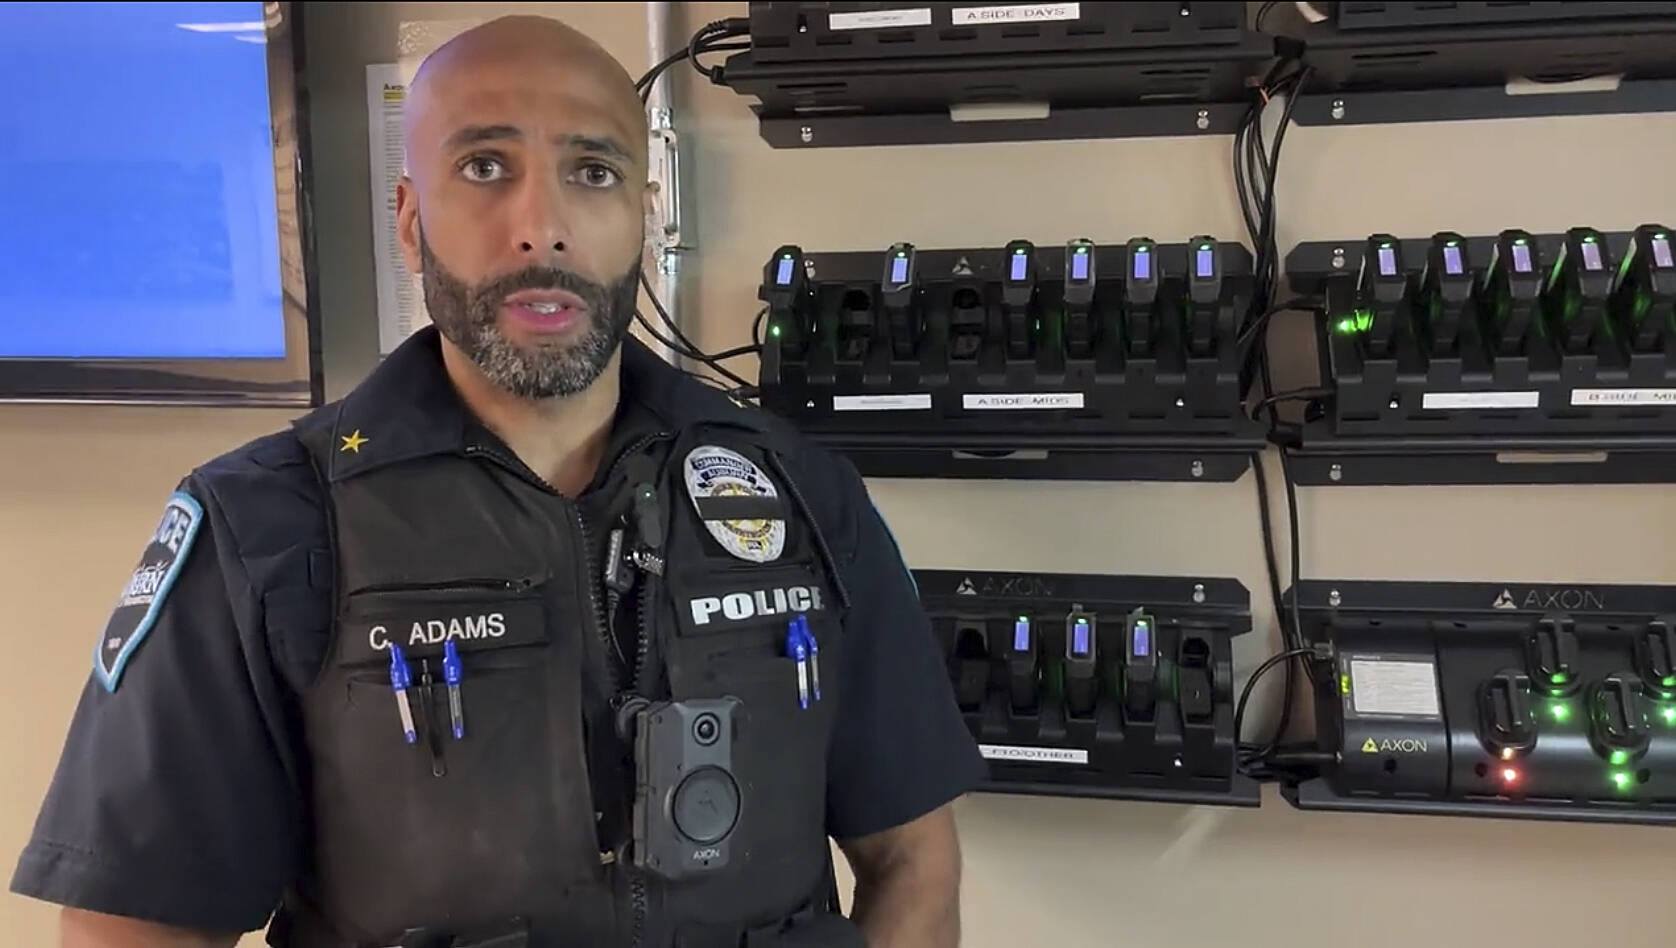 Cmdr. Adams of the Auburn Police Department demonstrates how to use the body-worn cameras. Screenshot courtesy of APD Twitter video